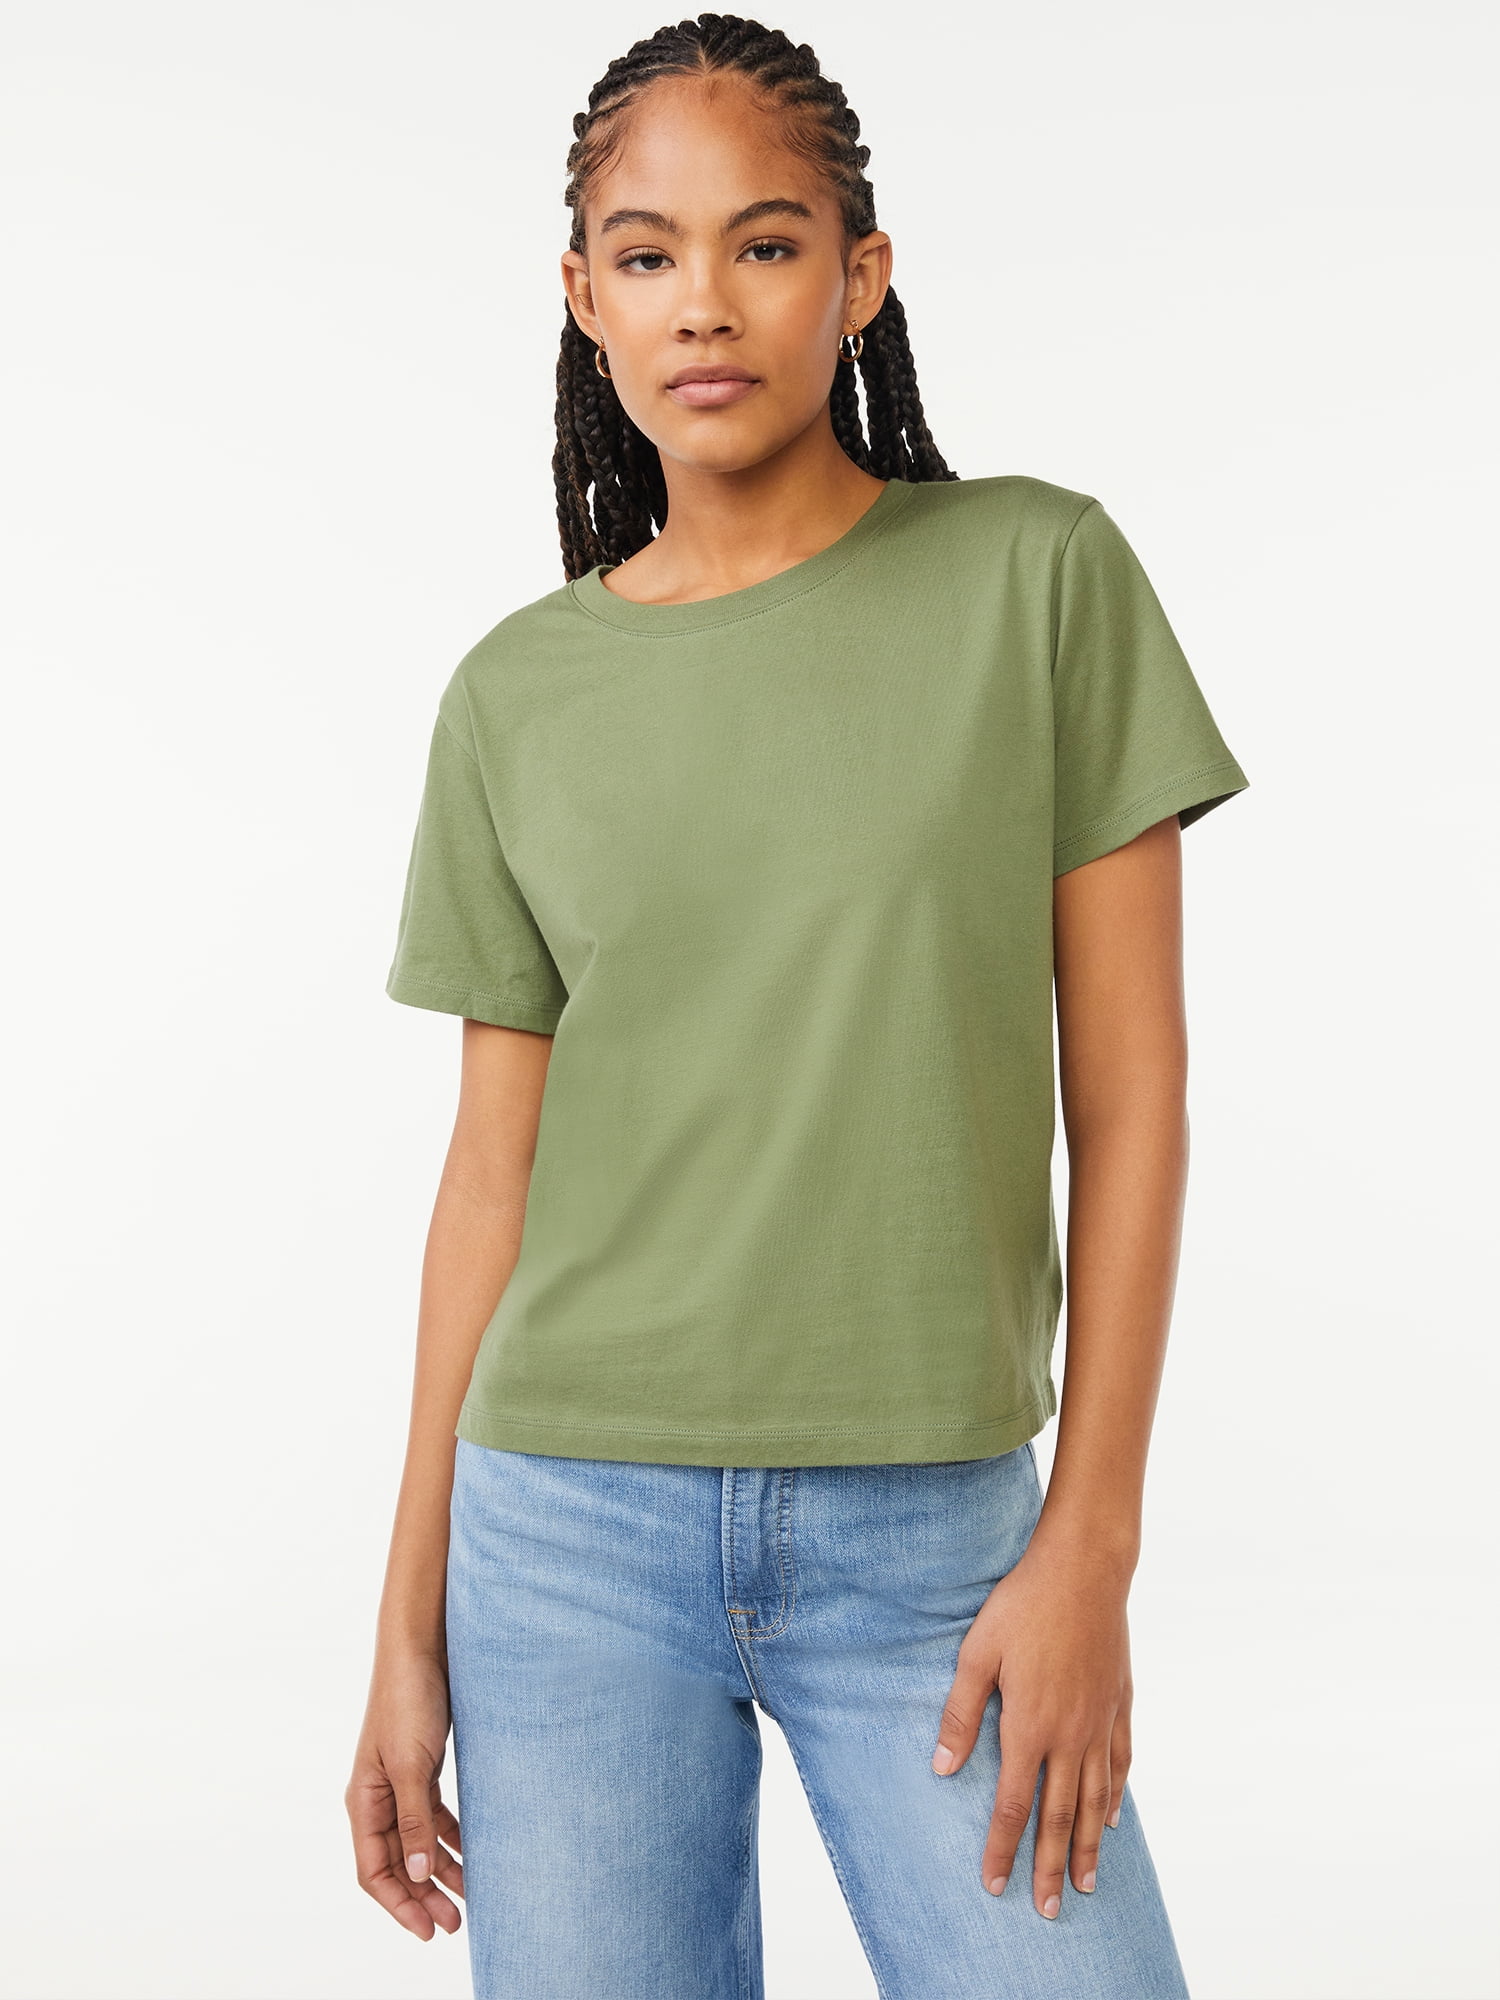 Free Assembly Women's Boxy Cropped Tee with Short Sleeves - Walmart.com